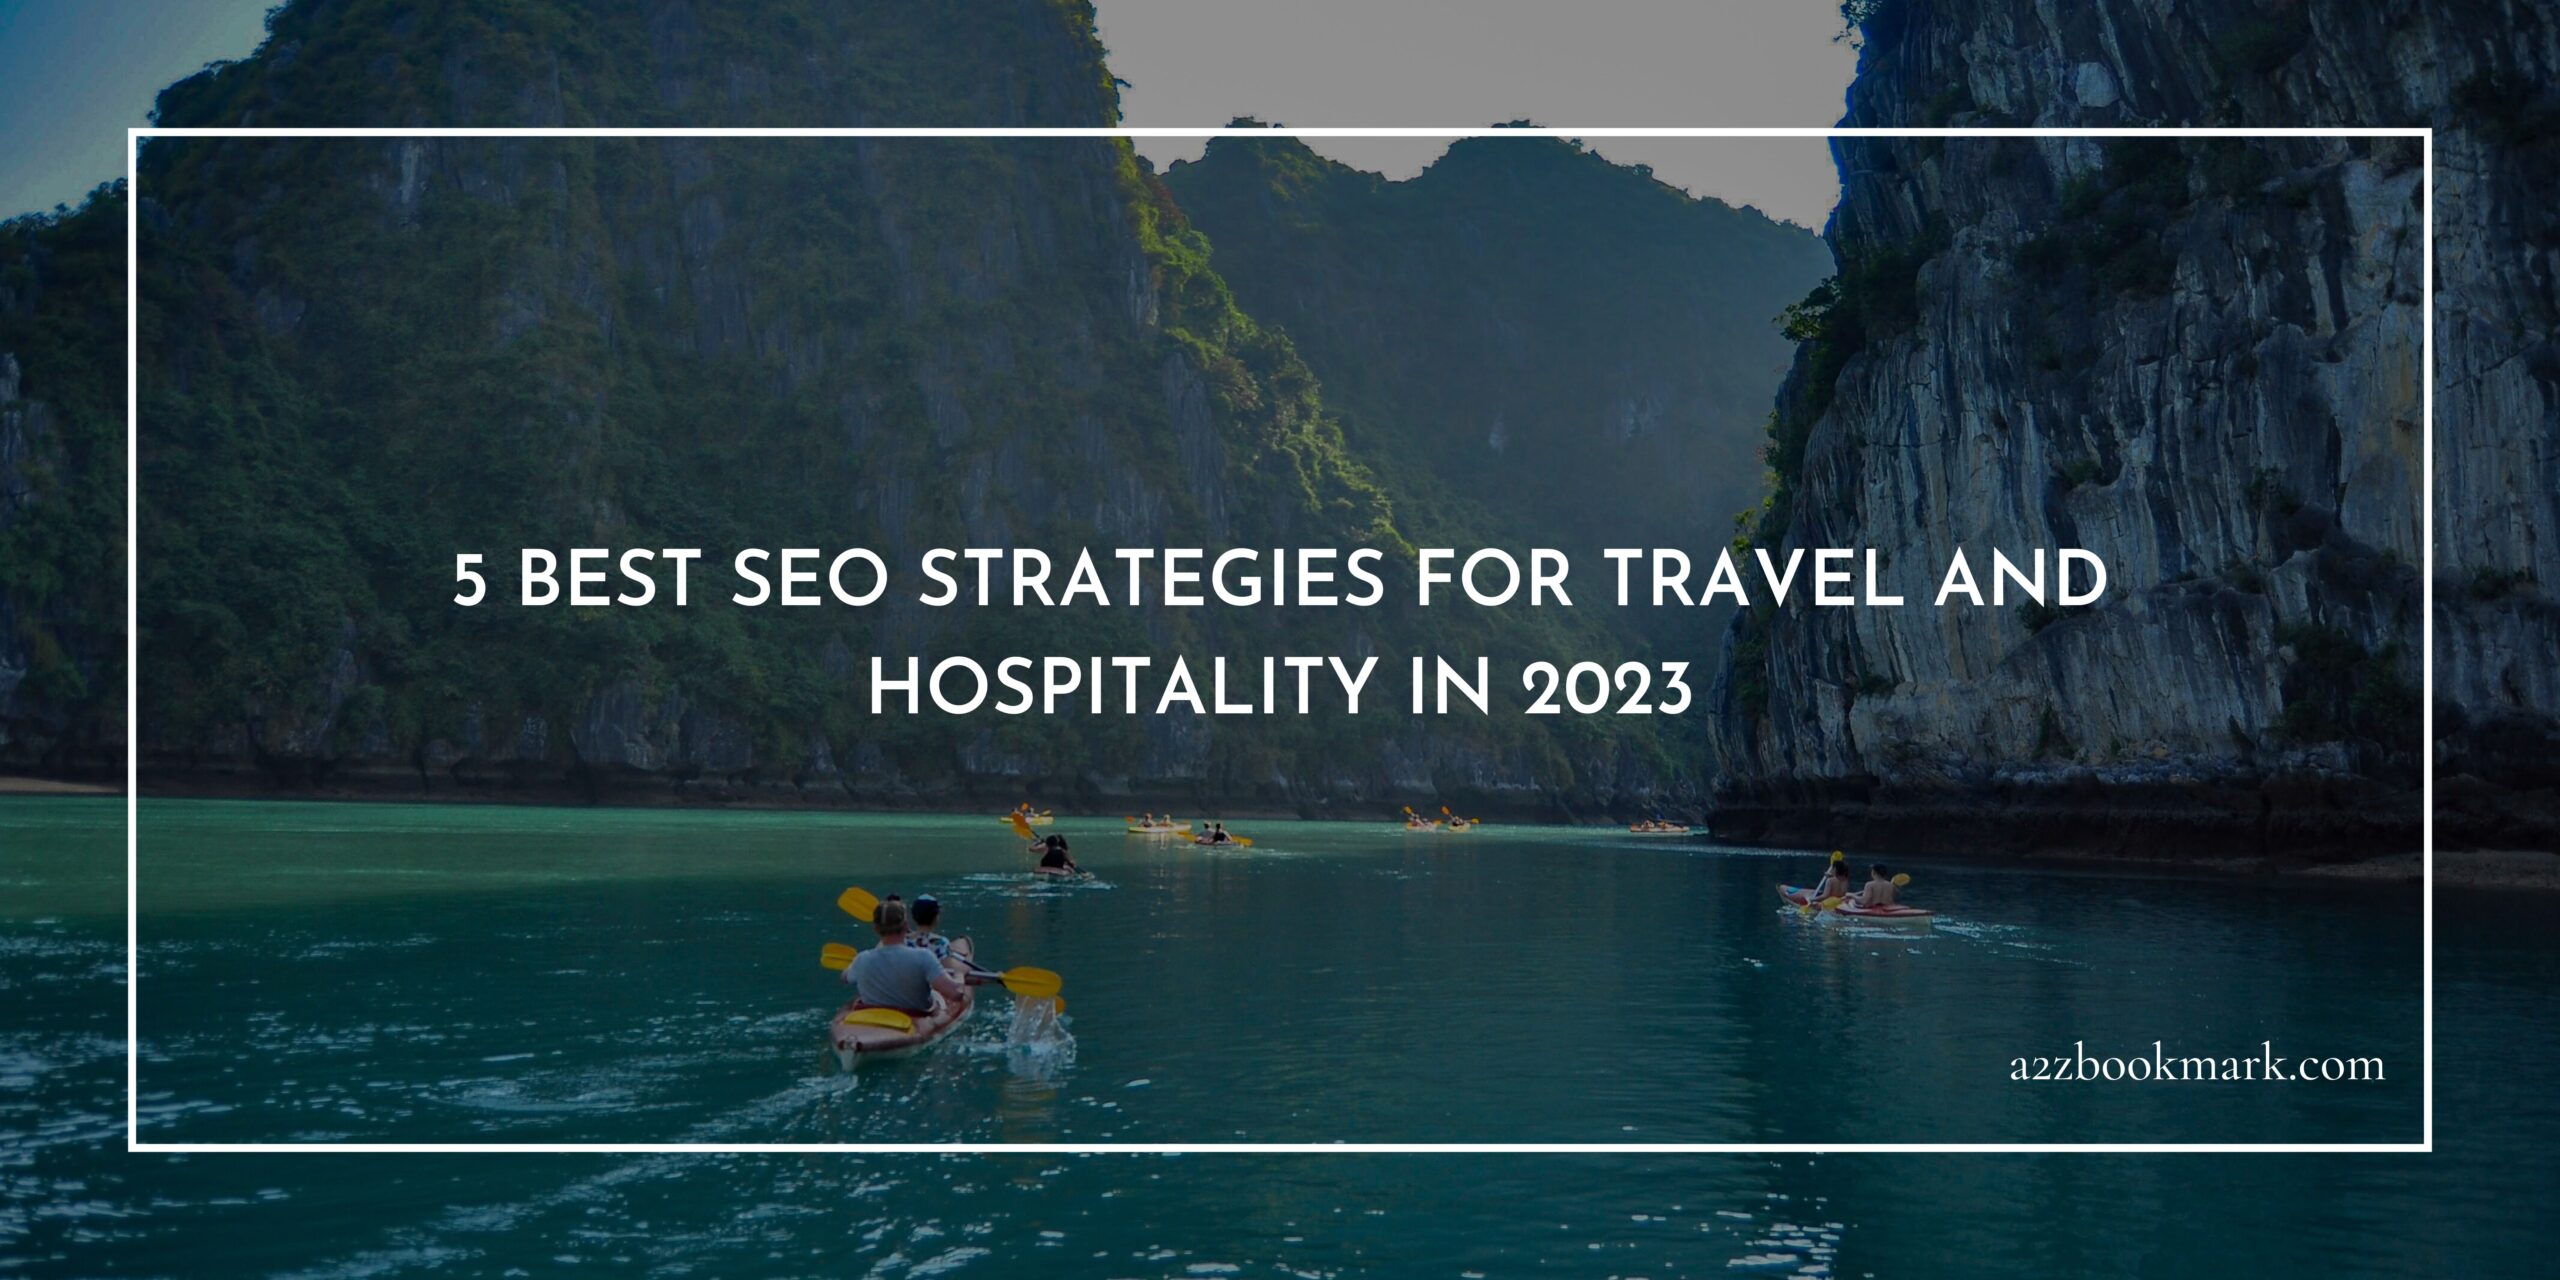 5 Best SEO Strategies for Travel and Hospitality in 2023